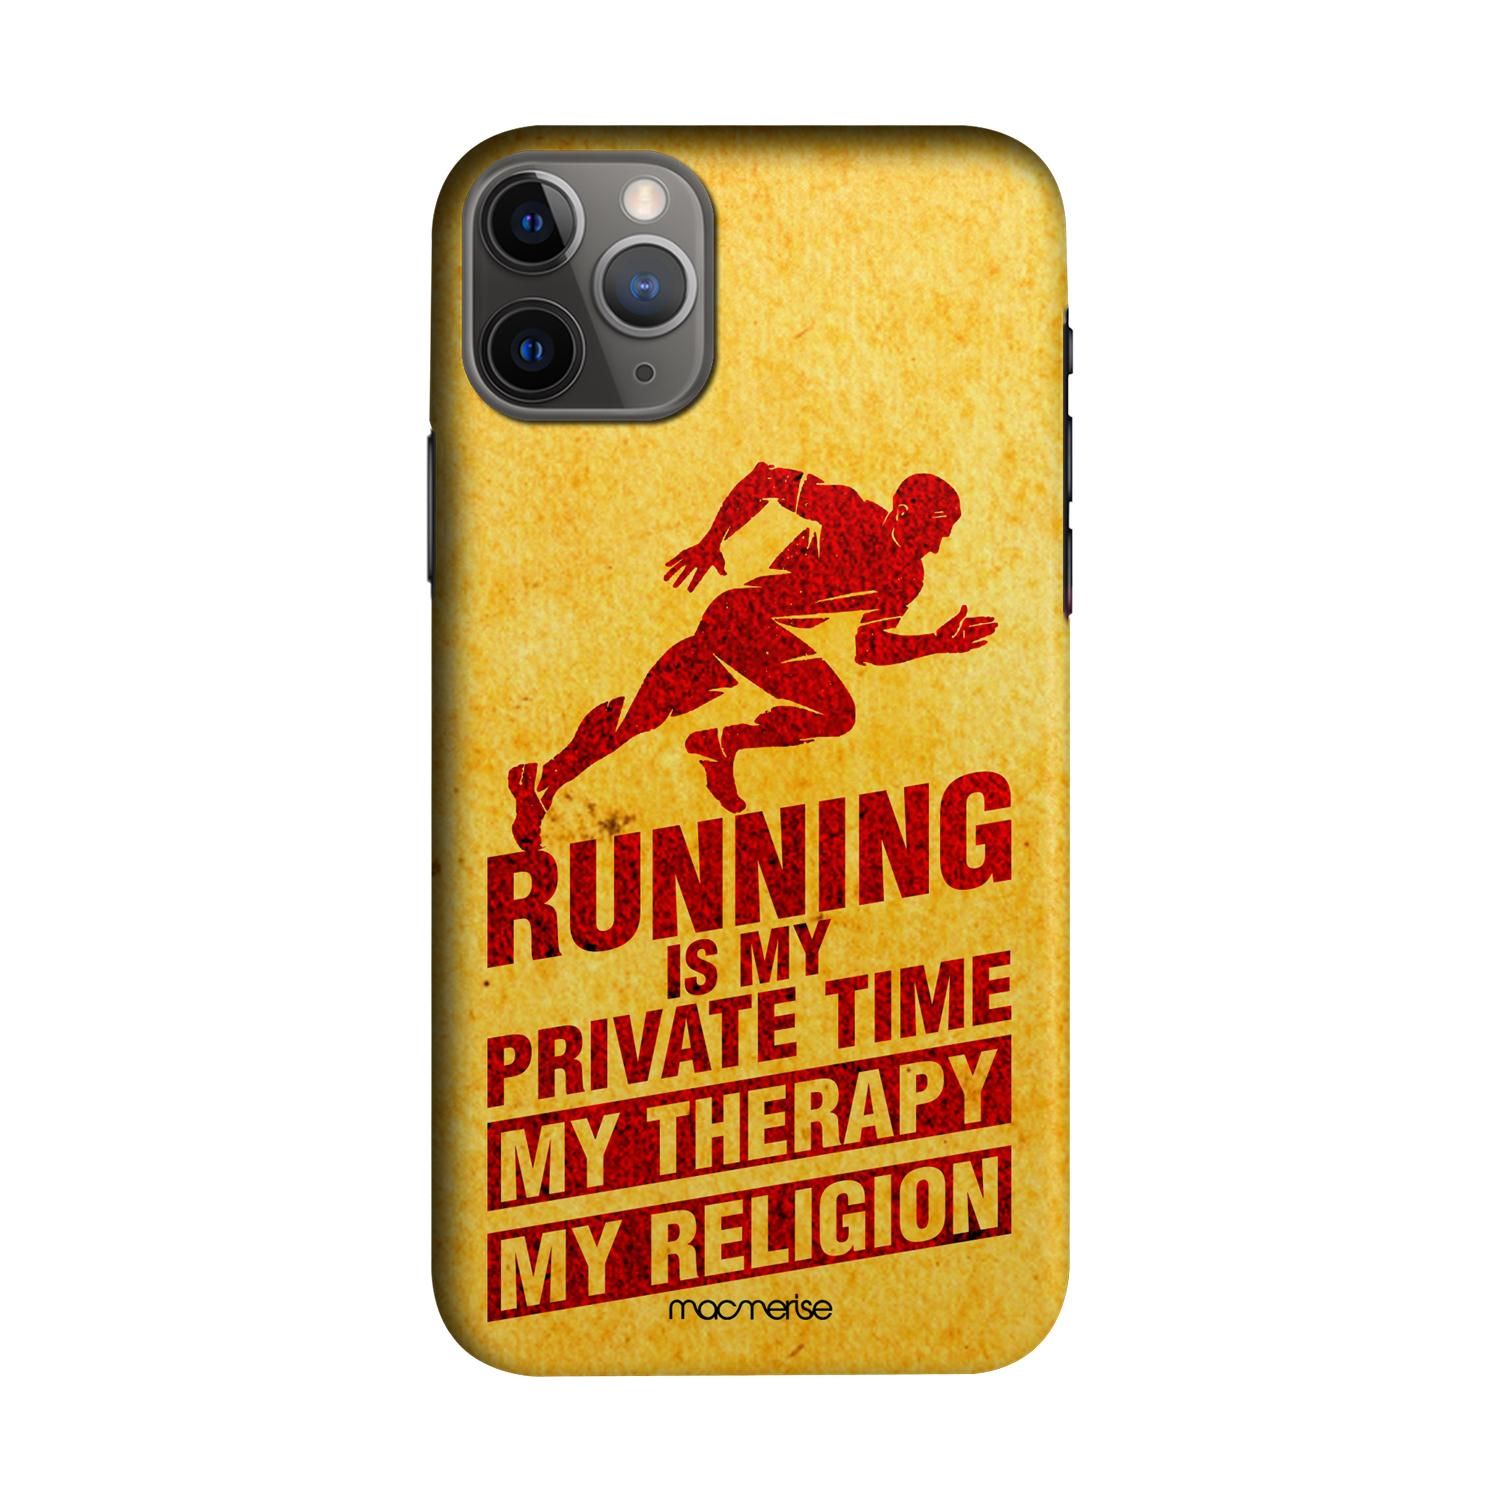 Religion Of Running - Sleek Phone Case for iPhone 11 Pro Max